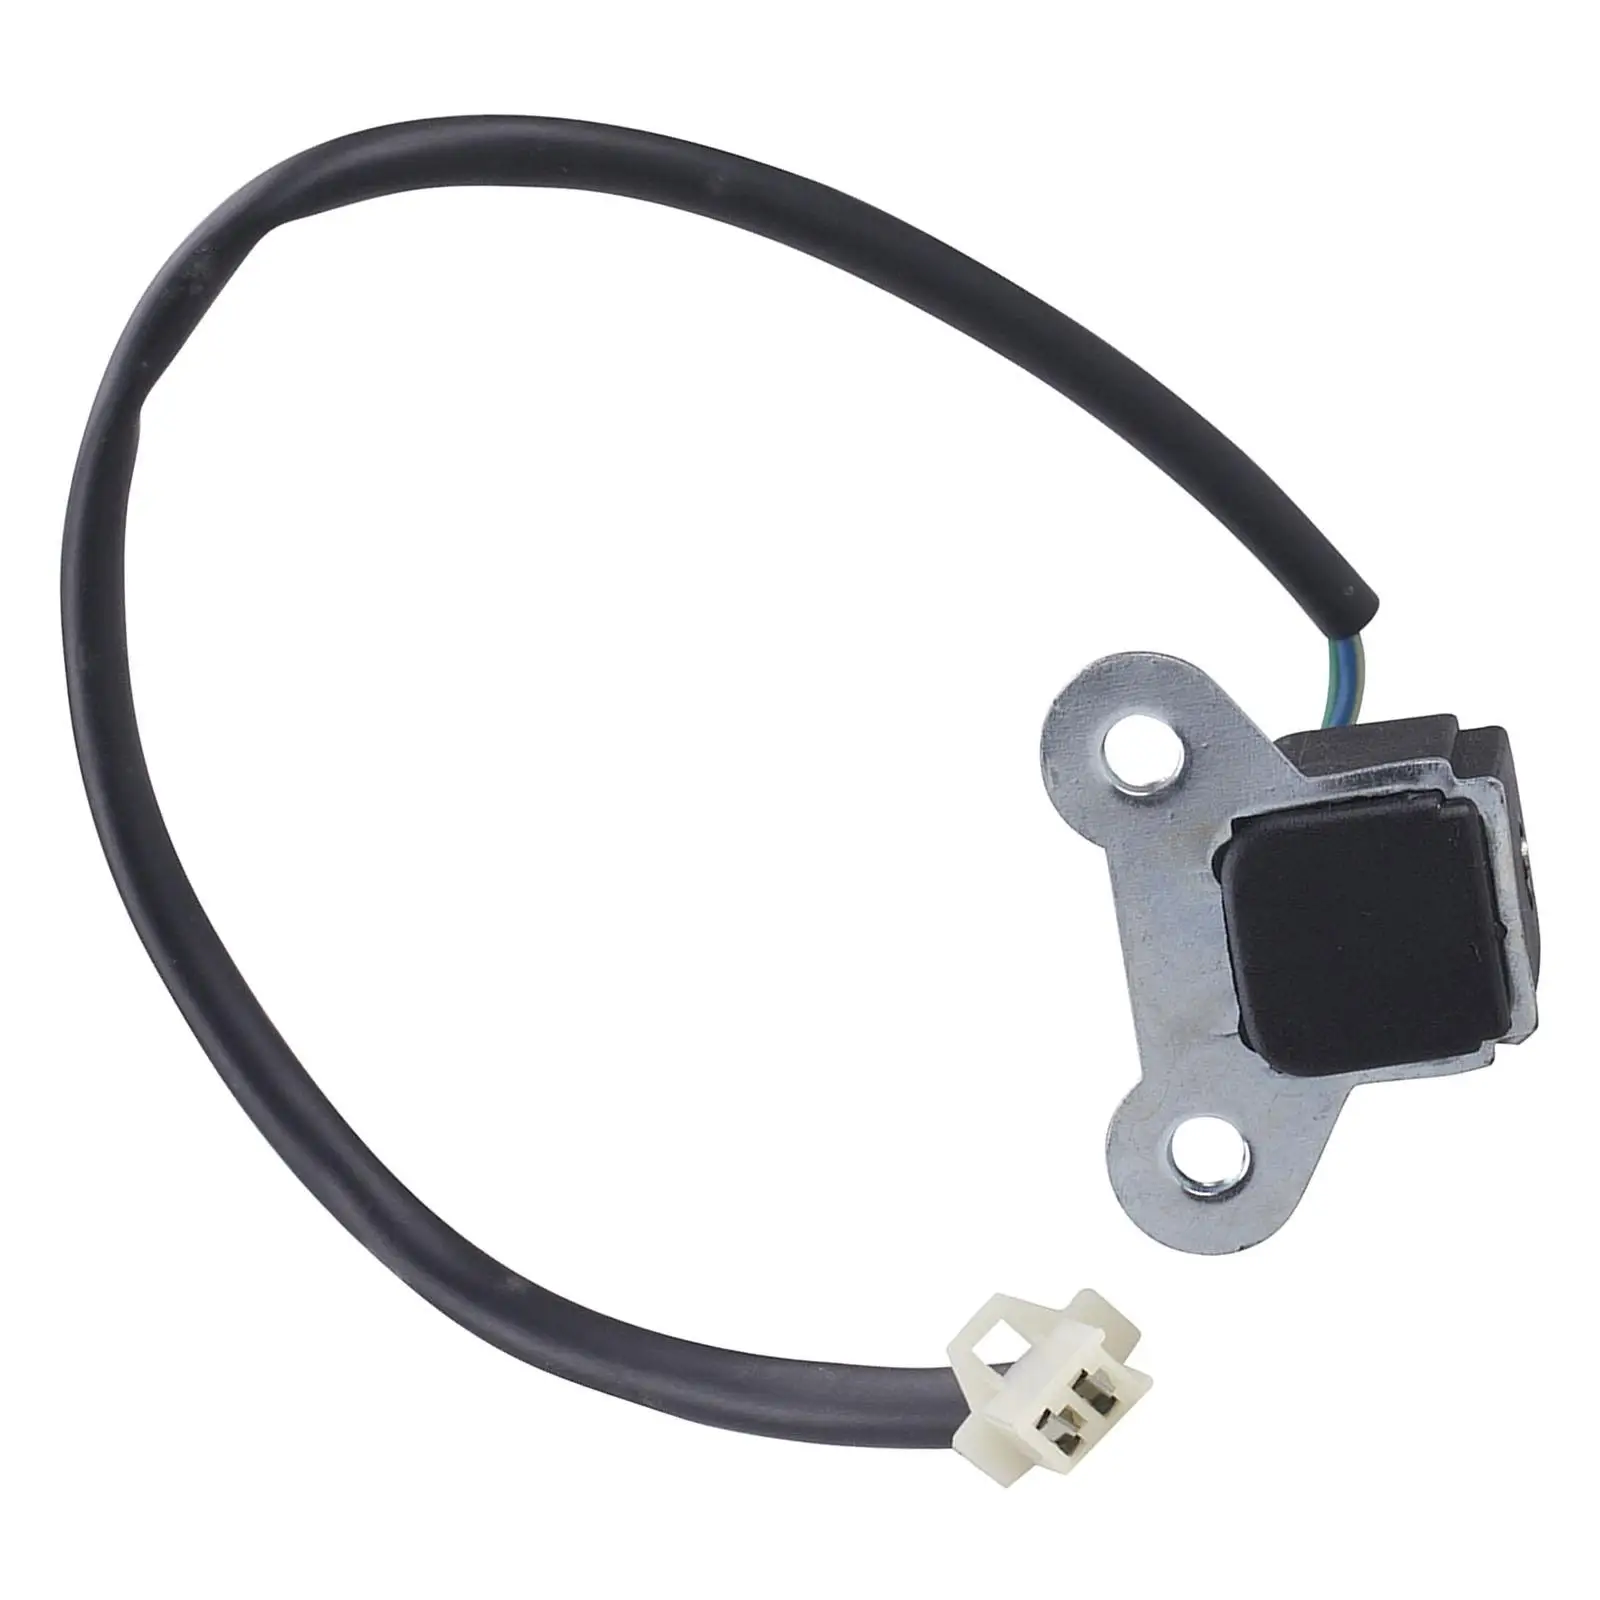 Coil Igniter Stator Toggle, Pulse Ignition Sensor, Water Cooled for CH250 Gy6 250cc Scooter ATV, Moped